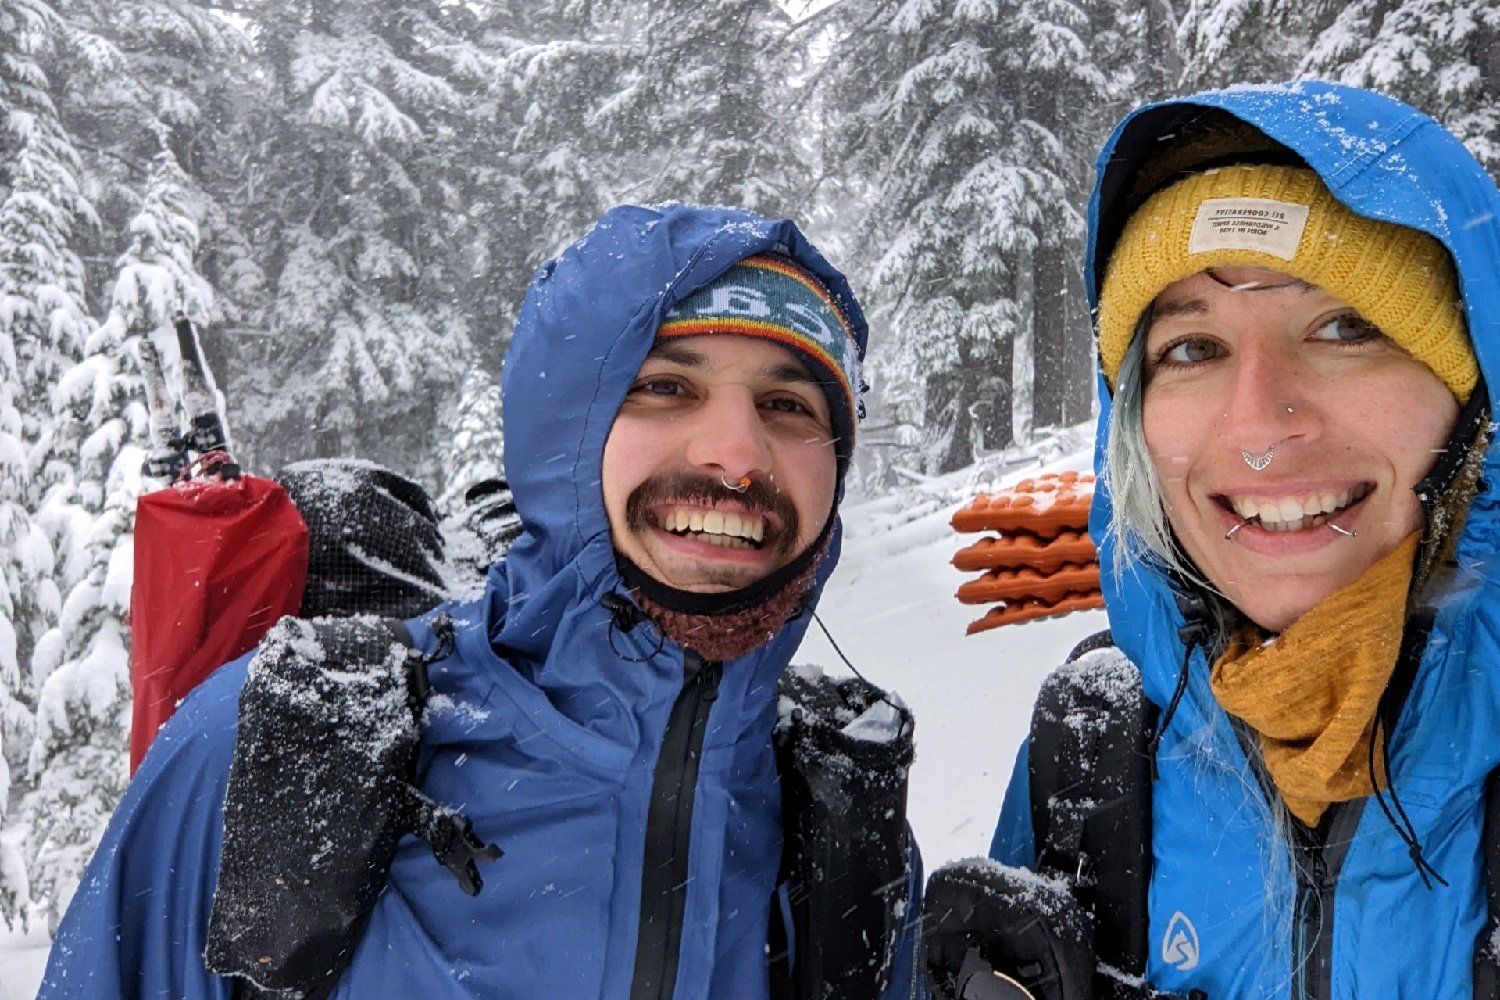 Two hikers wearing the Zpacks Vertice and Enlightened Equipment Visp in the snow